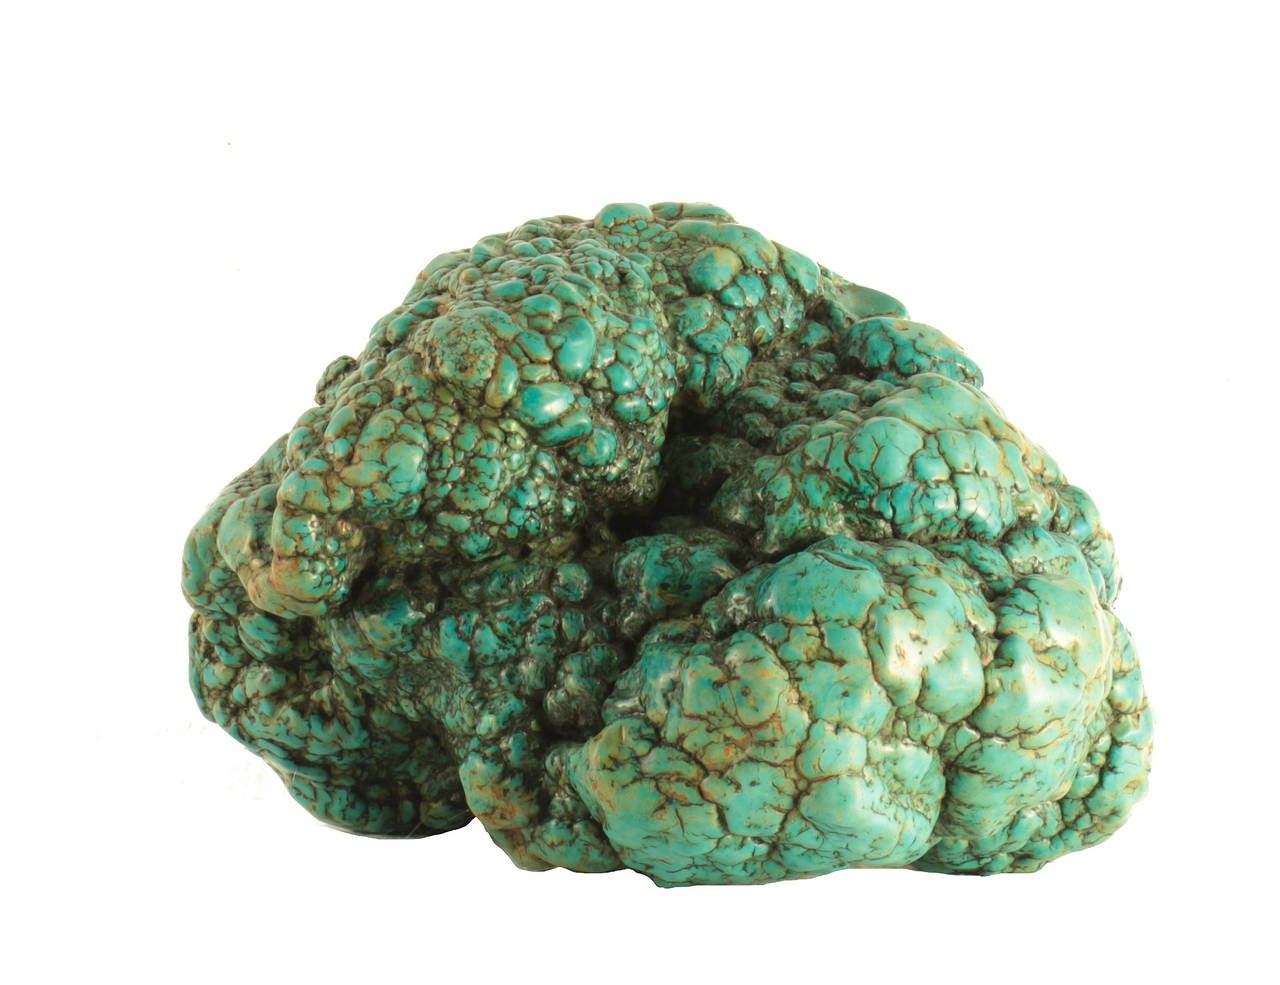 This huge piece of ancient Tibetan turquoise has a lovely green patina from handling over the ages. It weighs more than 18 lbs. (more than 8 kgs) its huge size makes it extremely rare.